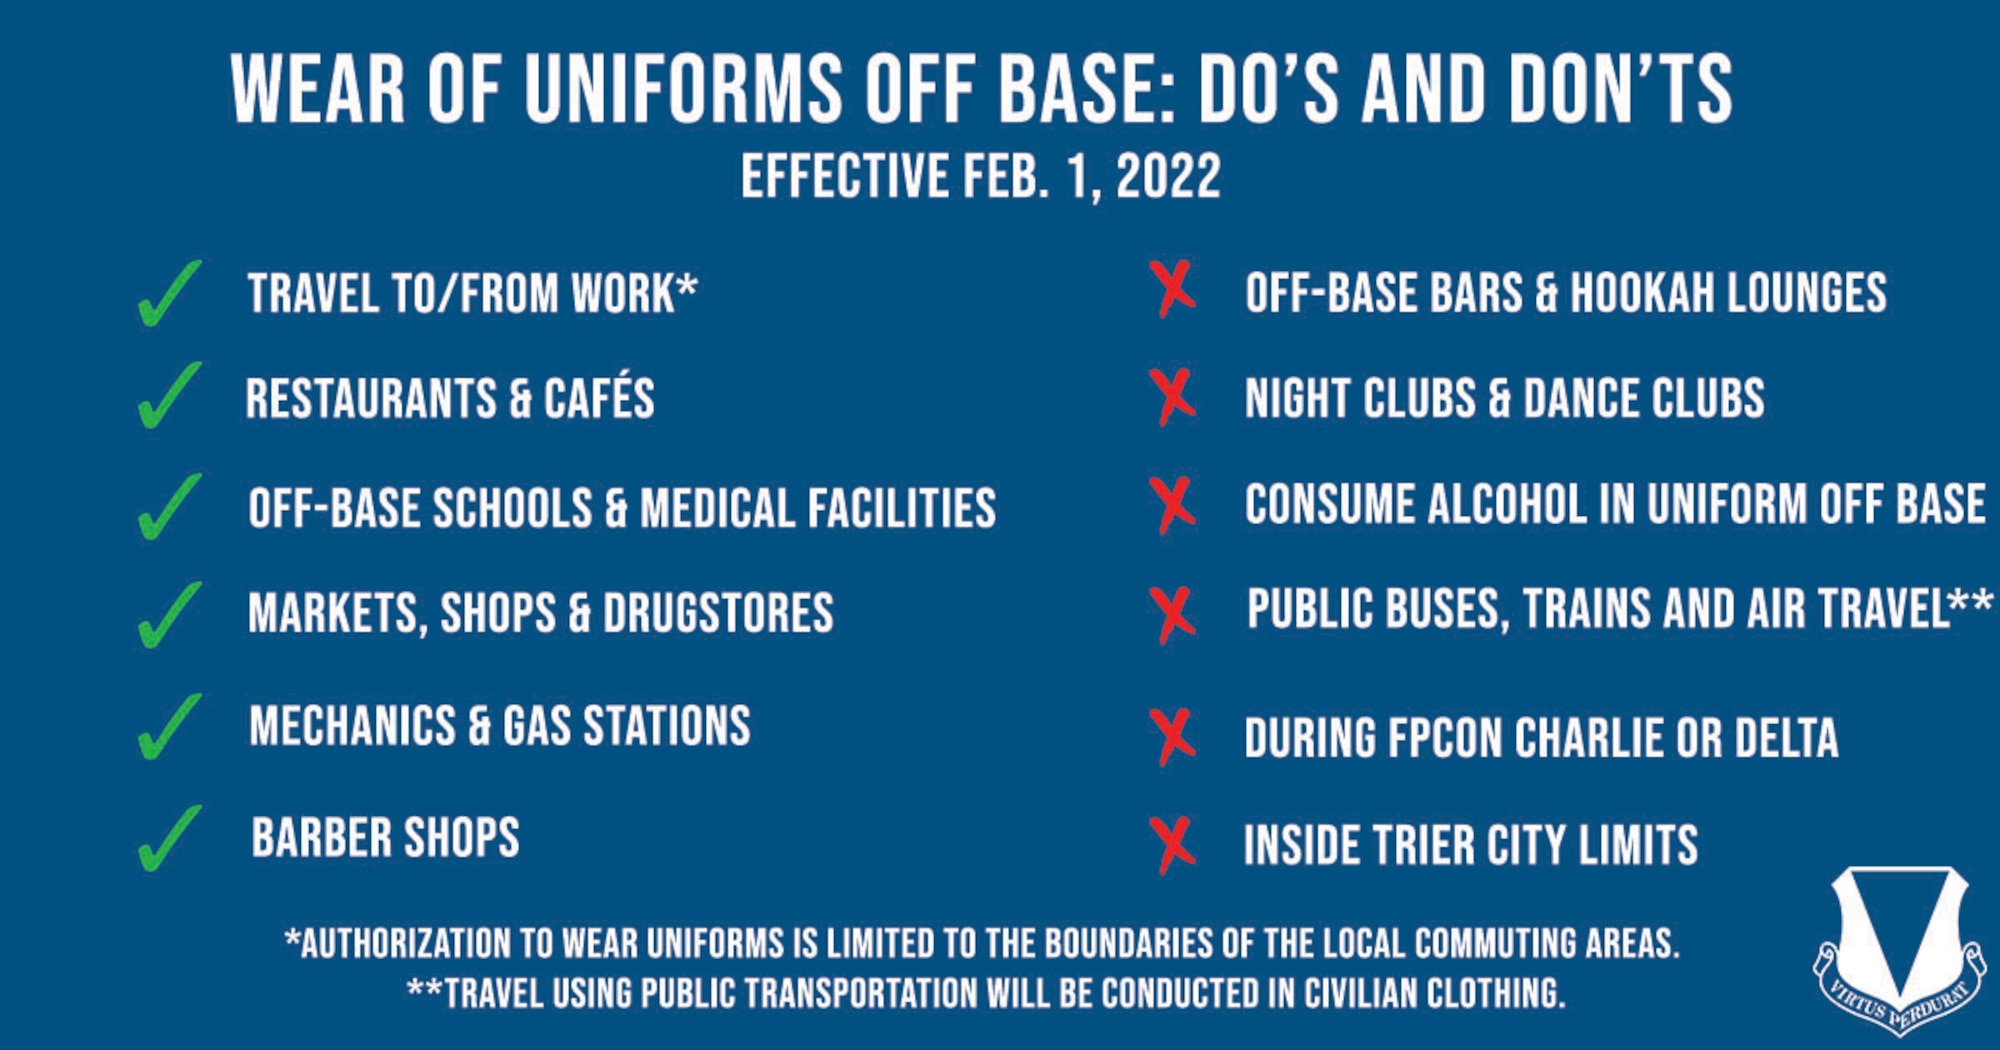 A graphic shows the do's and don'ts of off-base uniform wear